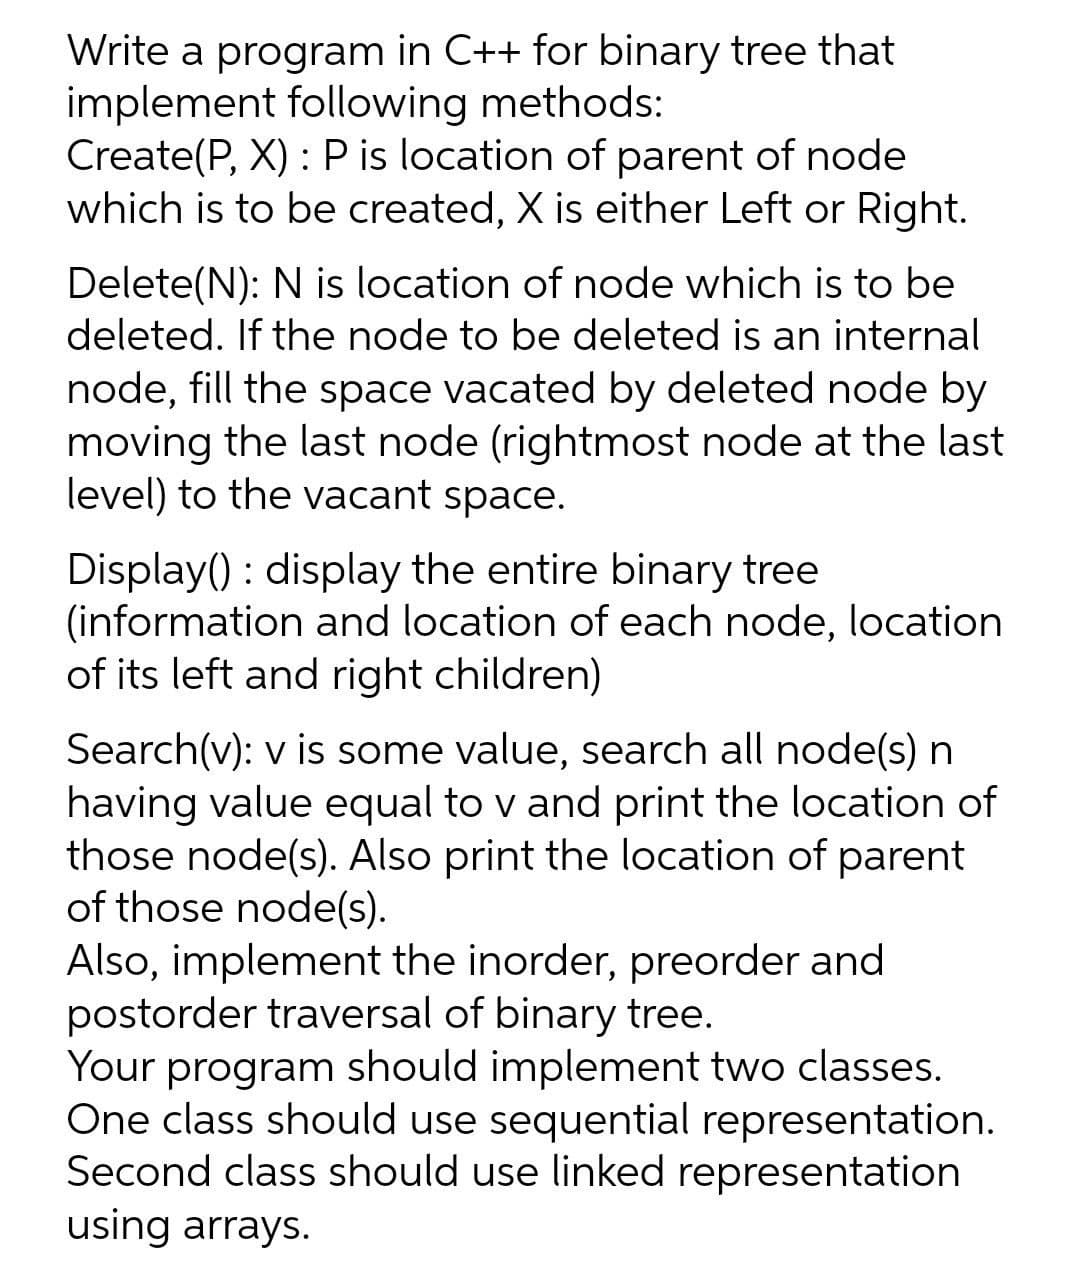 Write a program in C++ for binary tree that
implement following methods:
Create(P, X) : P is location of parent of node
which is to be created, X is either Left or Right.
Delete(N): N is location of node which is to be
deleted. If the node to be deleted is an internal
node, fill the space vacated by deleted node by
moving the last node (rightmost node at the last
level) to the vacant space.
Display() : display the entire binary tree
(information and location of each node, location
of its left and right children)
Search(v): v is some value, search all node(s) n
having value equal to v and print the location of
those node(s). Also print the location of parent
of those node(s).
Also, implement the inorder, preorder and
postorder traversal of binary tree.
Your program should implement two classes.
One class should use sequential representation.
Second class should use linked representation
using arrays.
